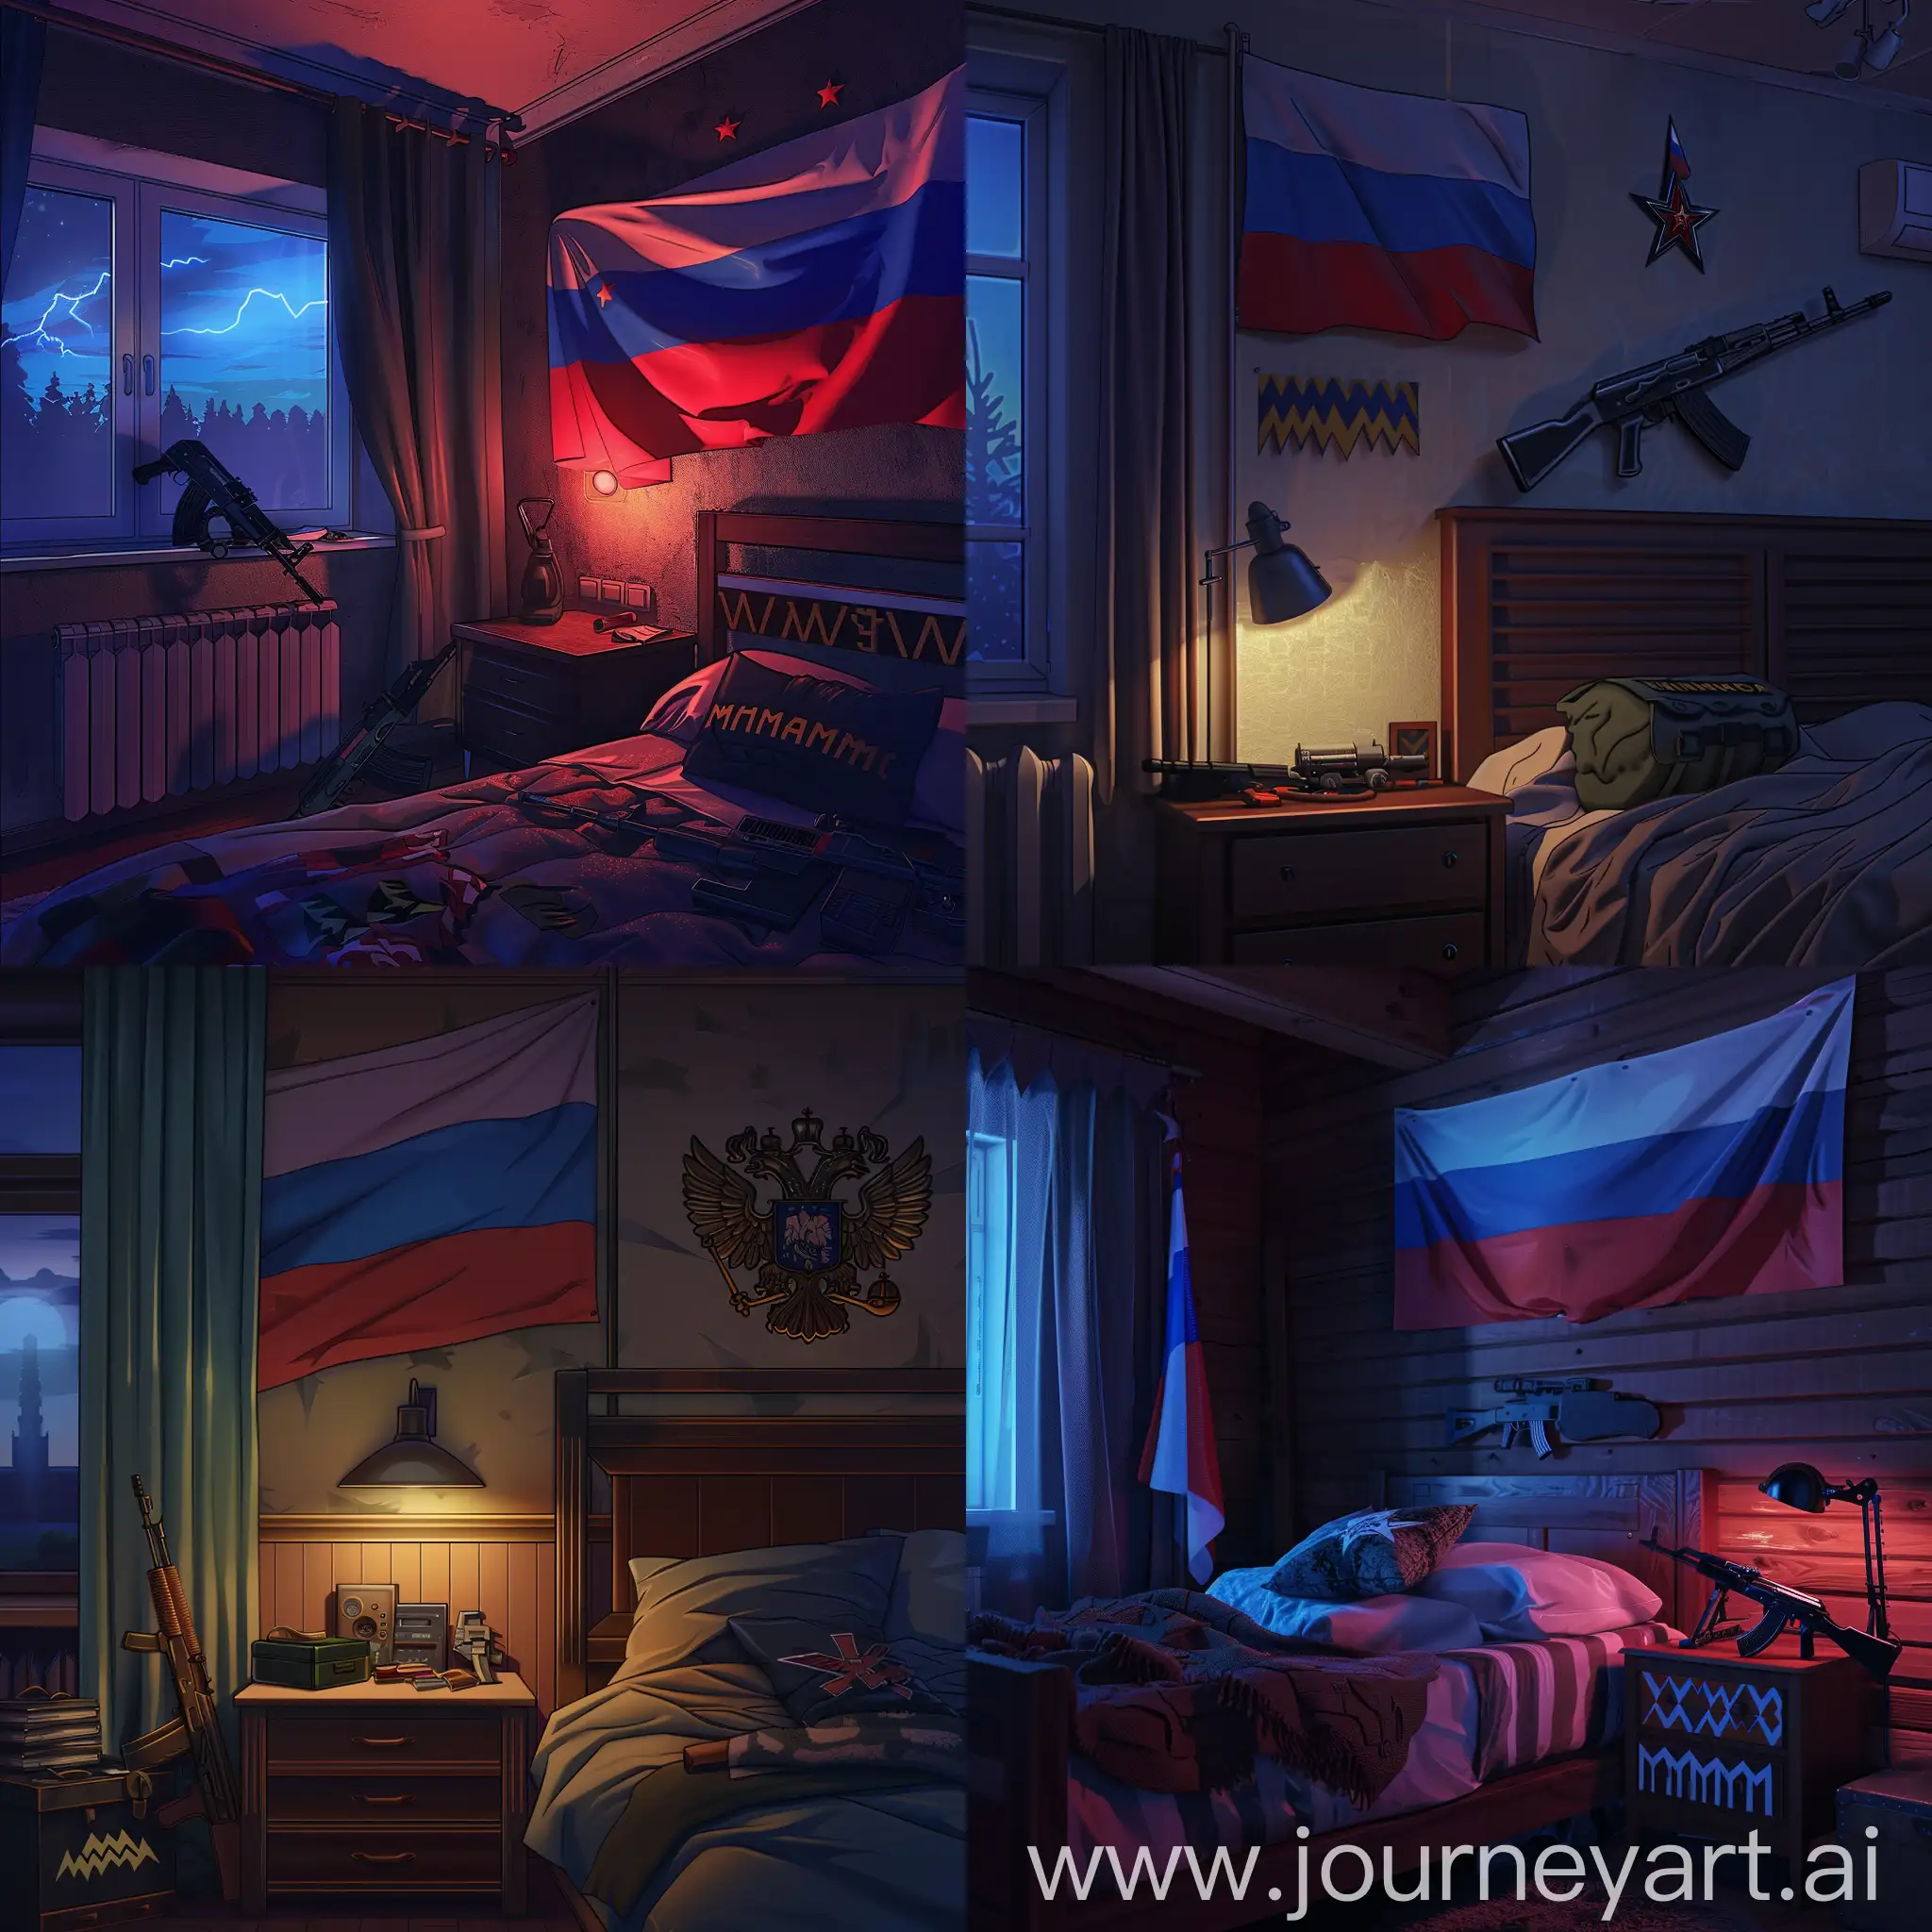 night, bedroom, Russian flag on the wall, Wagner PMC chevrons on the bedside table, AK-74 near the wall, high quality, anime style